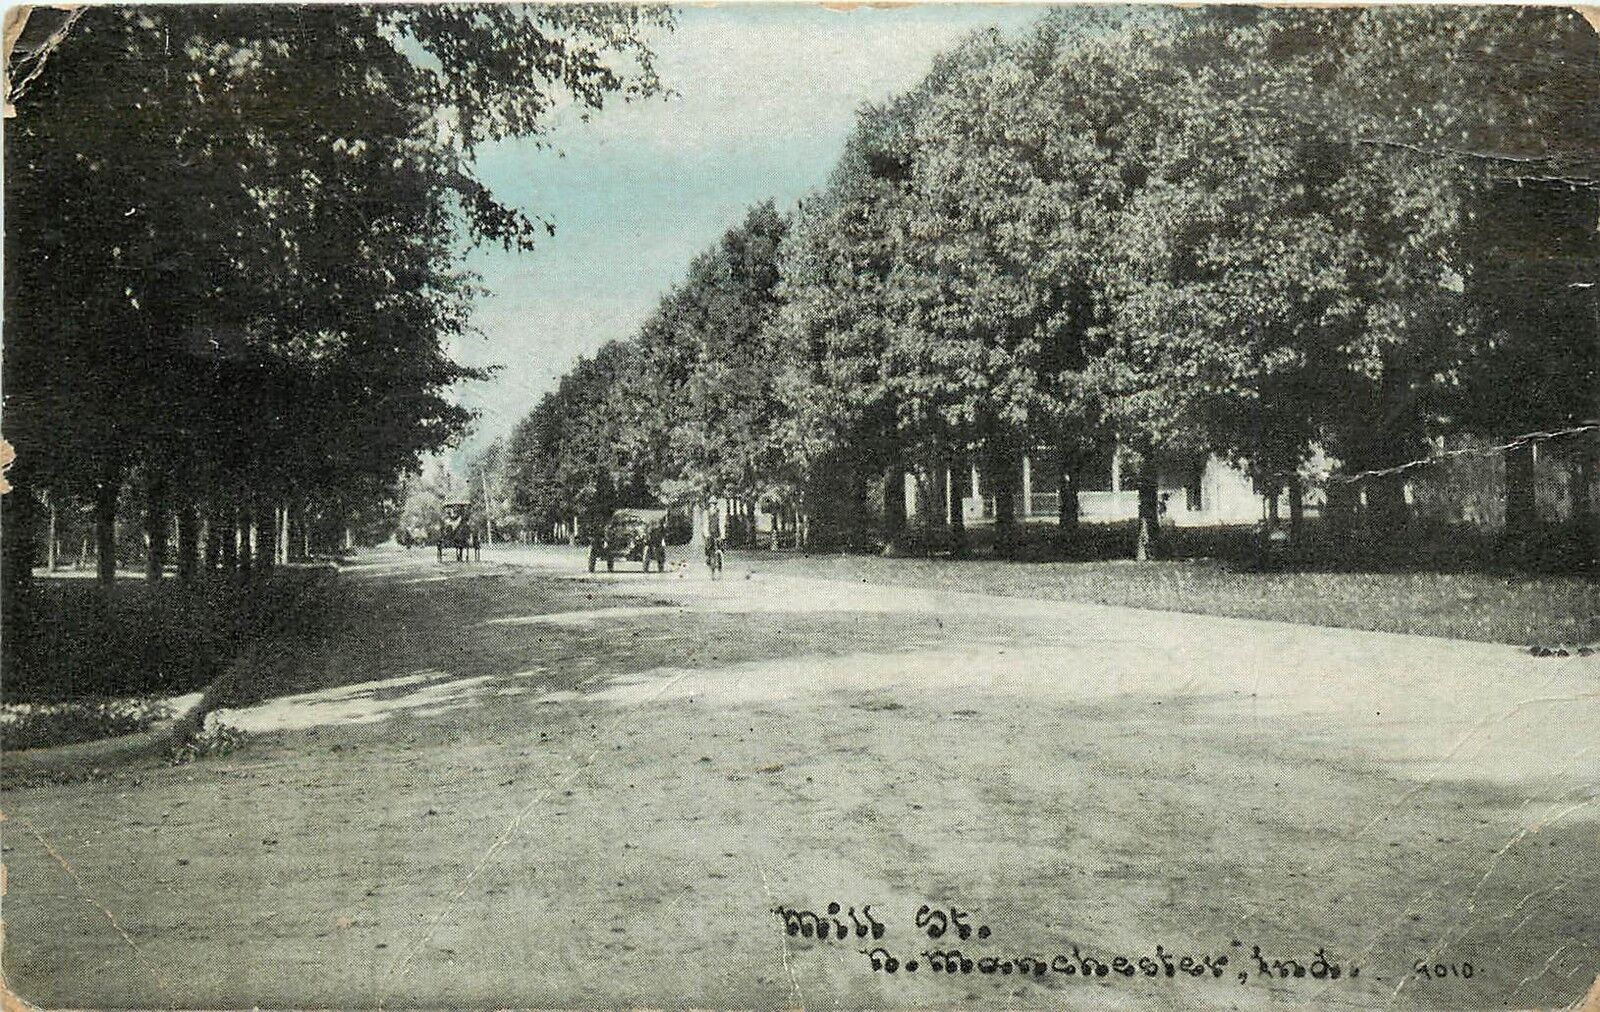 c1910 Printed Postcard; Mill Street, N. Manchester IN Wabash County Posted